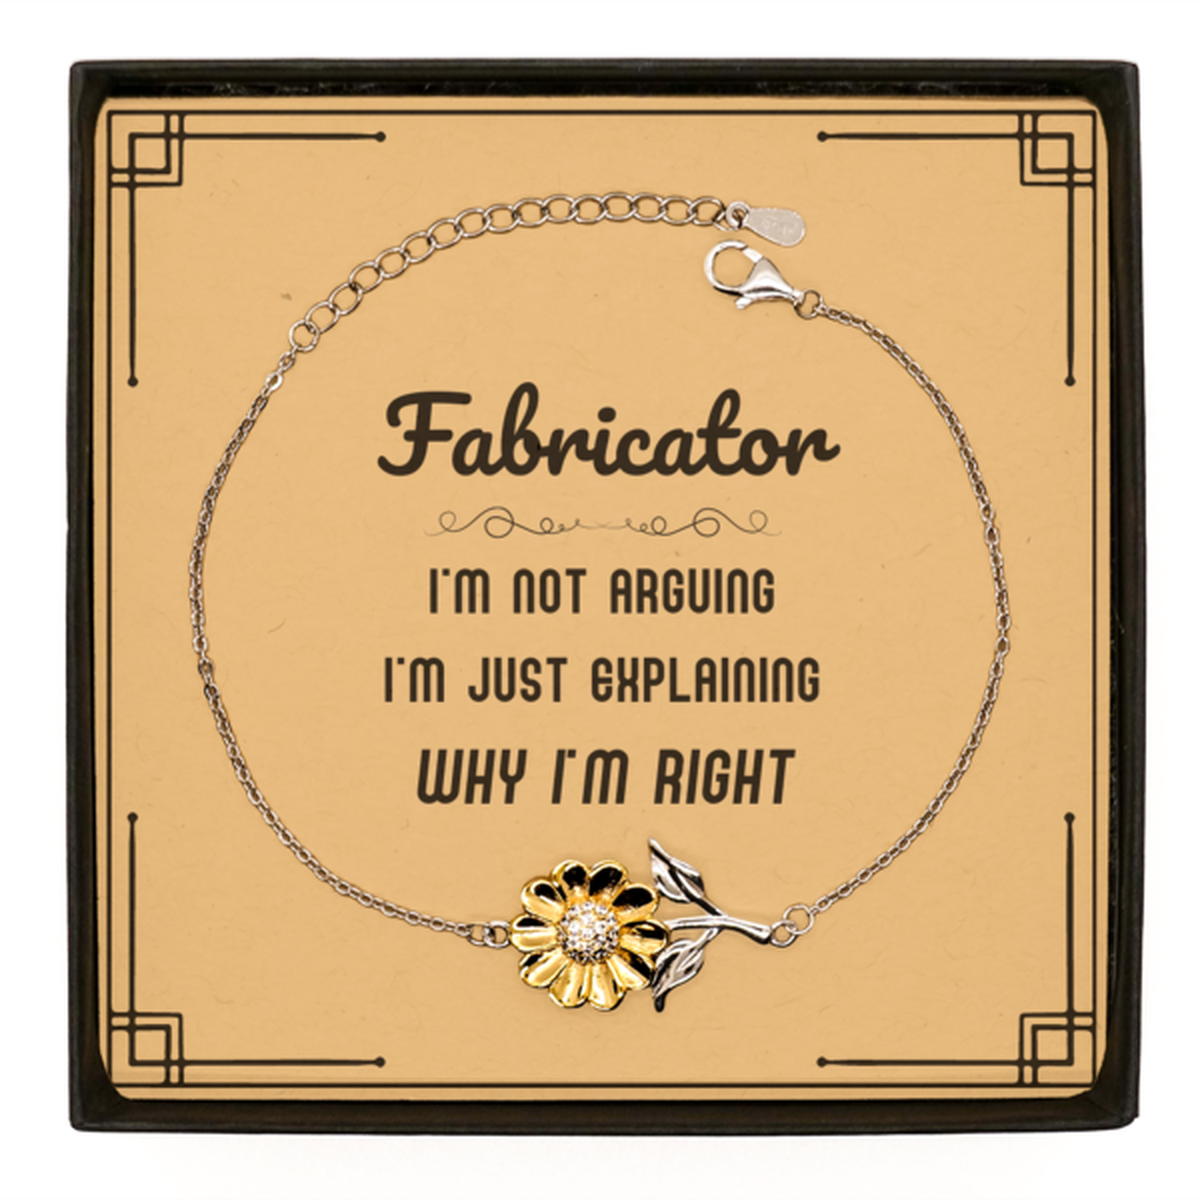 Fabricator I'm not Arguing. I'm Just Explaining Why I'm RIGHT Sunflower Bracelet, Funny Saying Quote Fabricator Gifts For Fabricator Message Card Graduation Birthday Christmas Gifts for Men Women Coworker